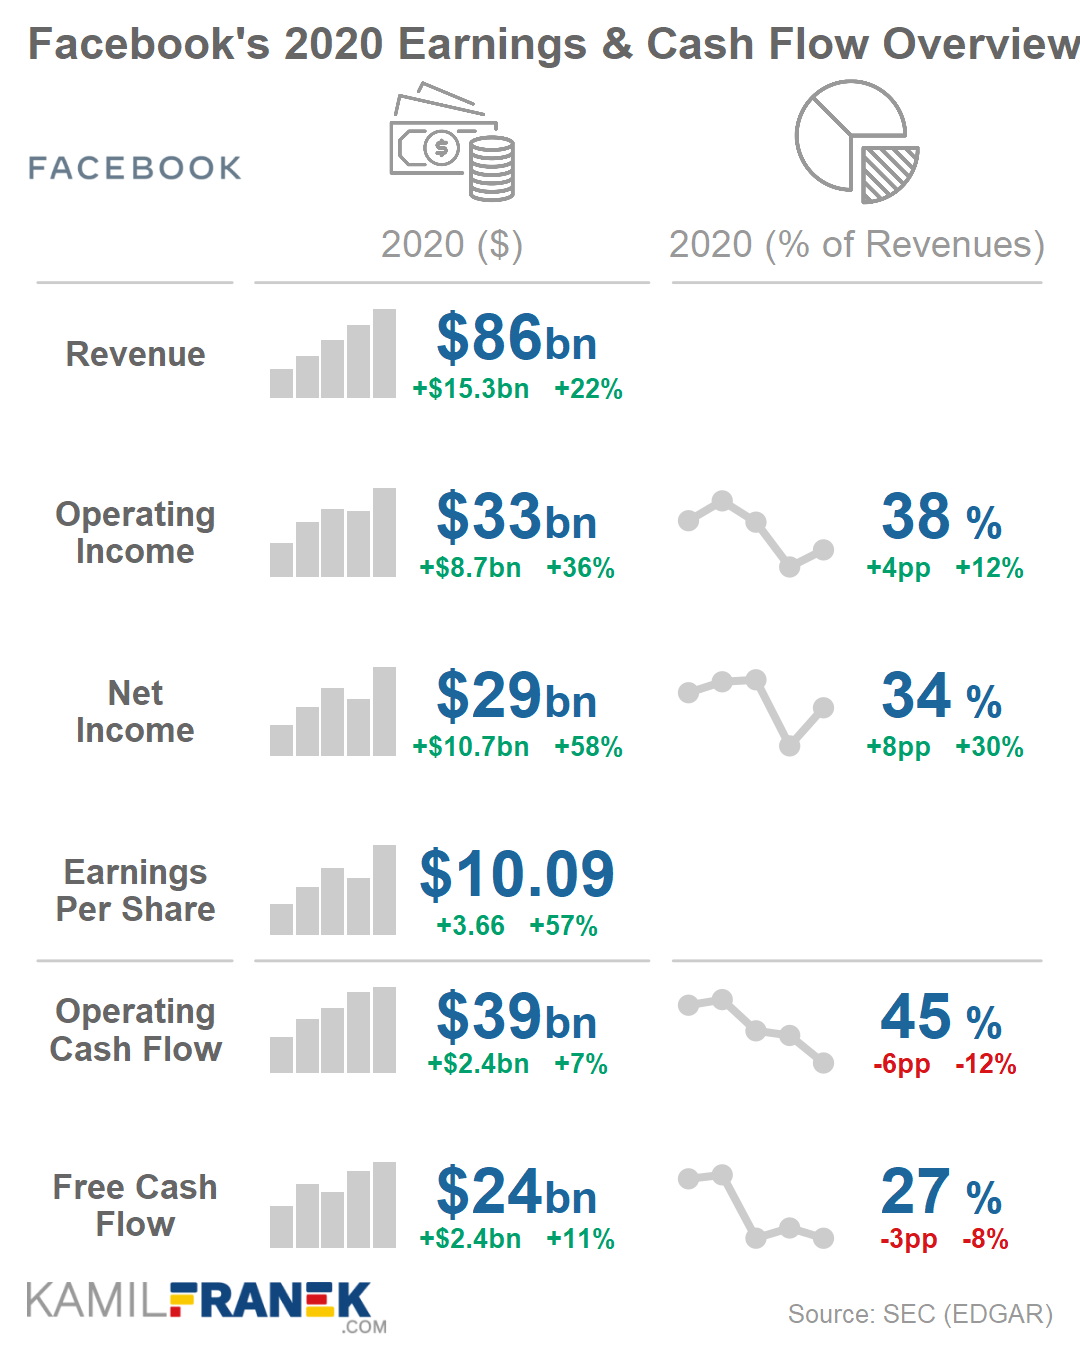 Facebook's income statement and cash flow statement key metrics - summary overview